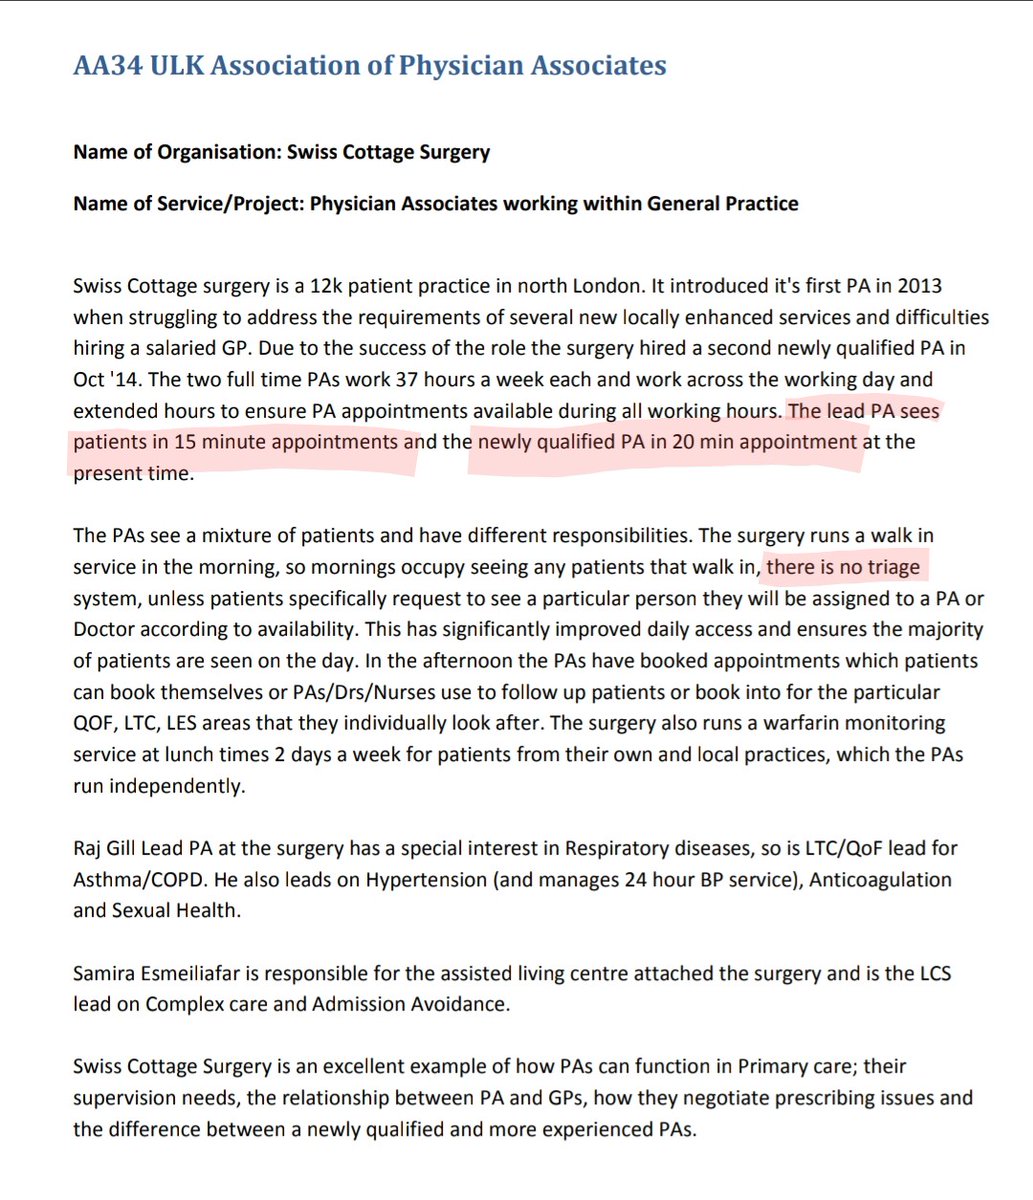 Document from HEE showing they were fully aware that PAs were seeing undifferentiated & untriaged patients in GP

Also an expectation for PAs to have 15min appointments. Many fully qualified GPs find that challenging!

Not safe

Where is @rcgp?

Source: web.archive.org/web/2016020602…